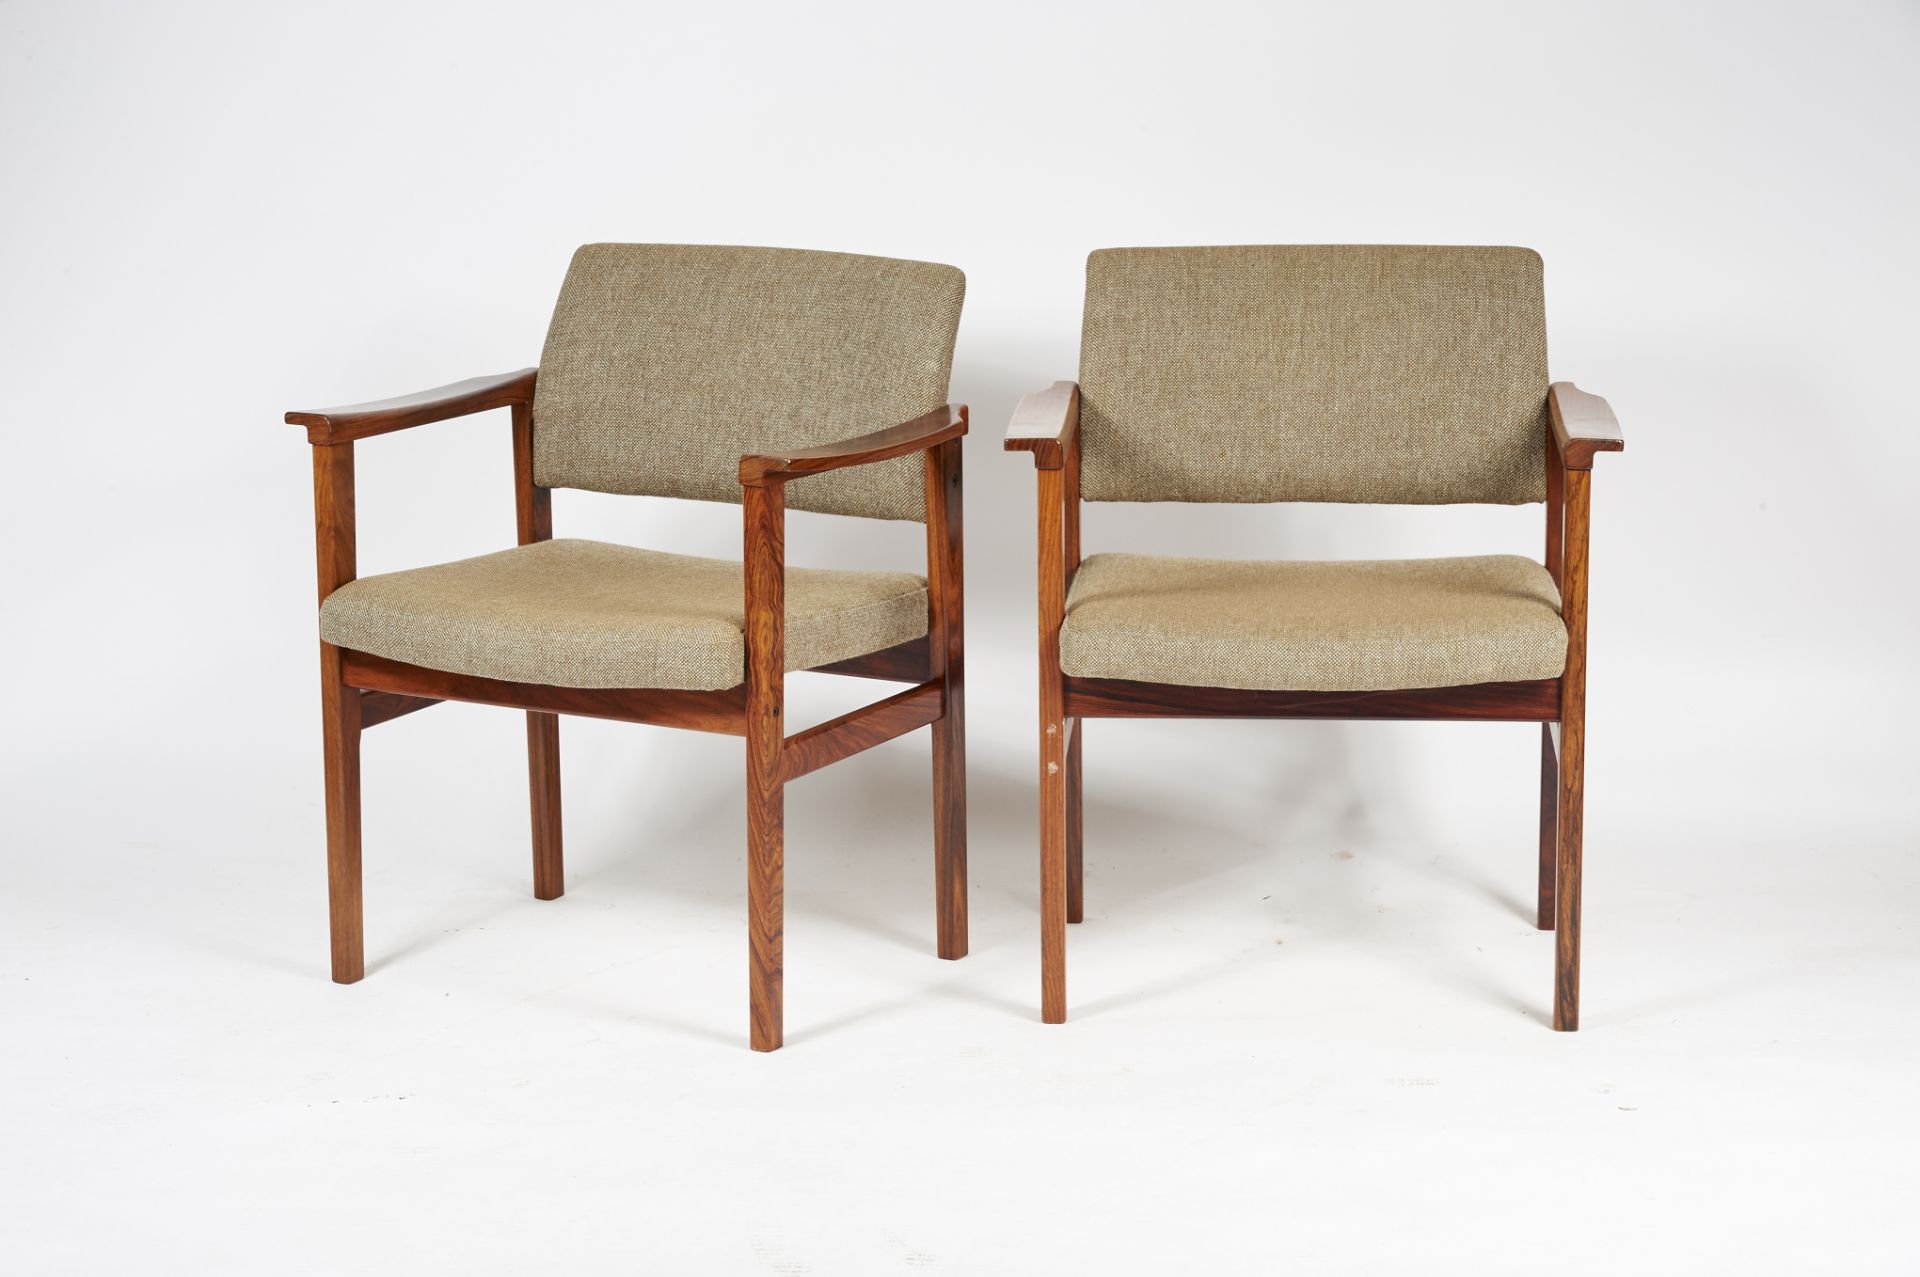 A Pair of Armchairs Brazilian rosewood upholstered backs and seats Danish 20th C. (the 60s) marked